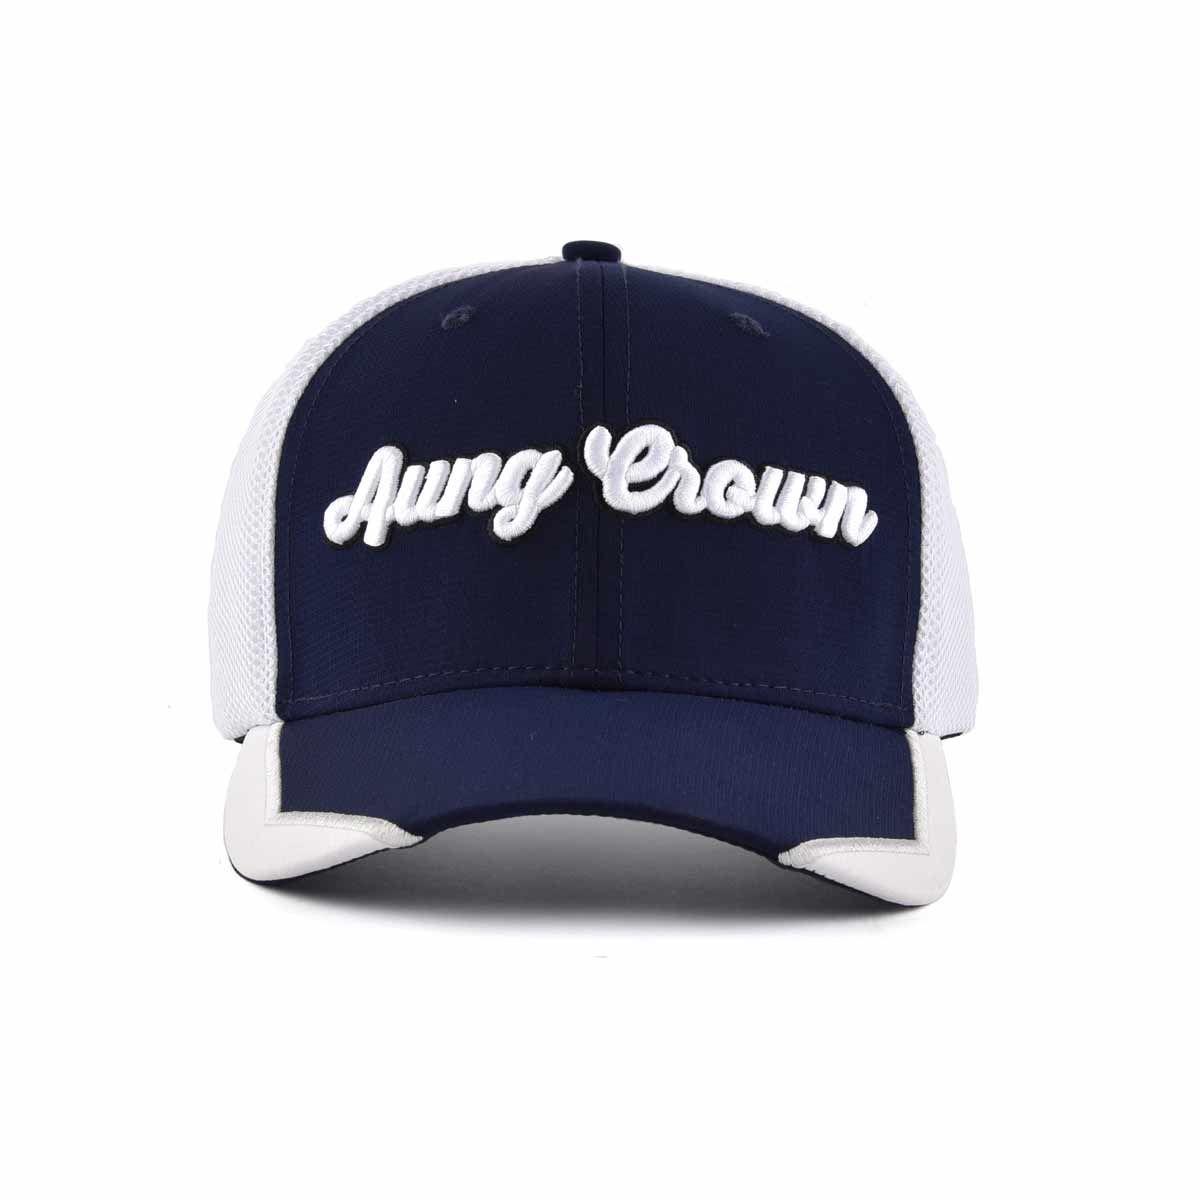 white and blue trucker hat